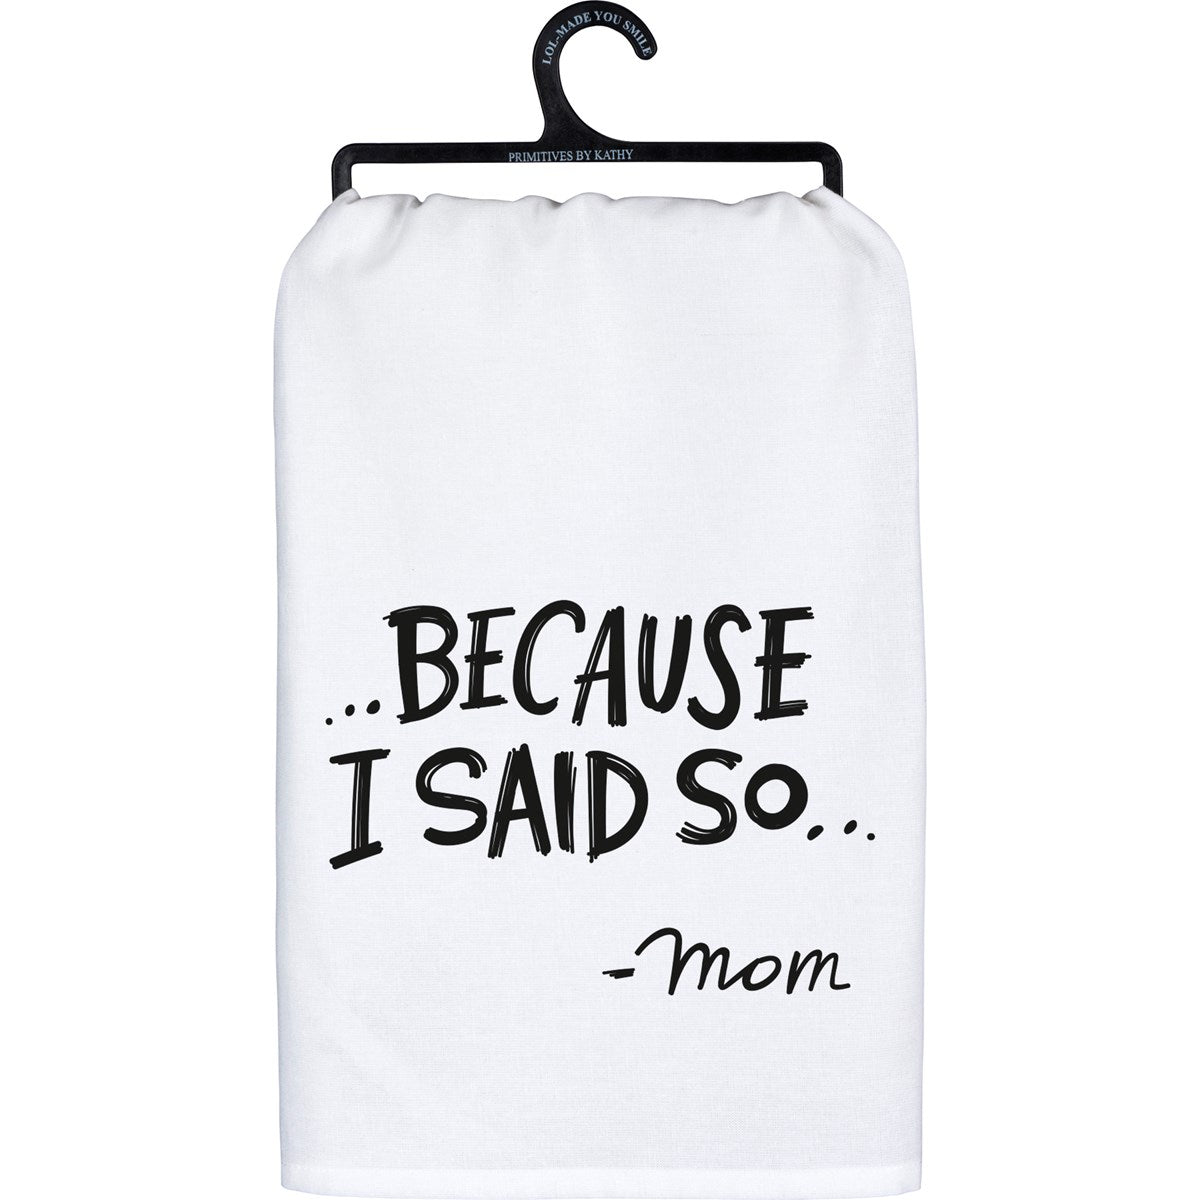 Funny mom white cotton kitchen towel with "...Because I said so...mom" sentiment printed on this 28" x 28" flour sack towel